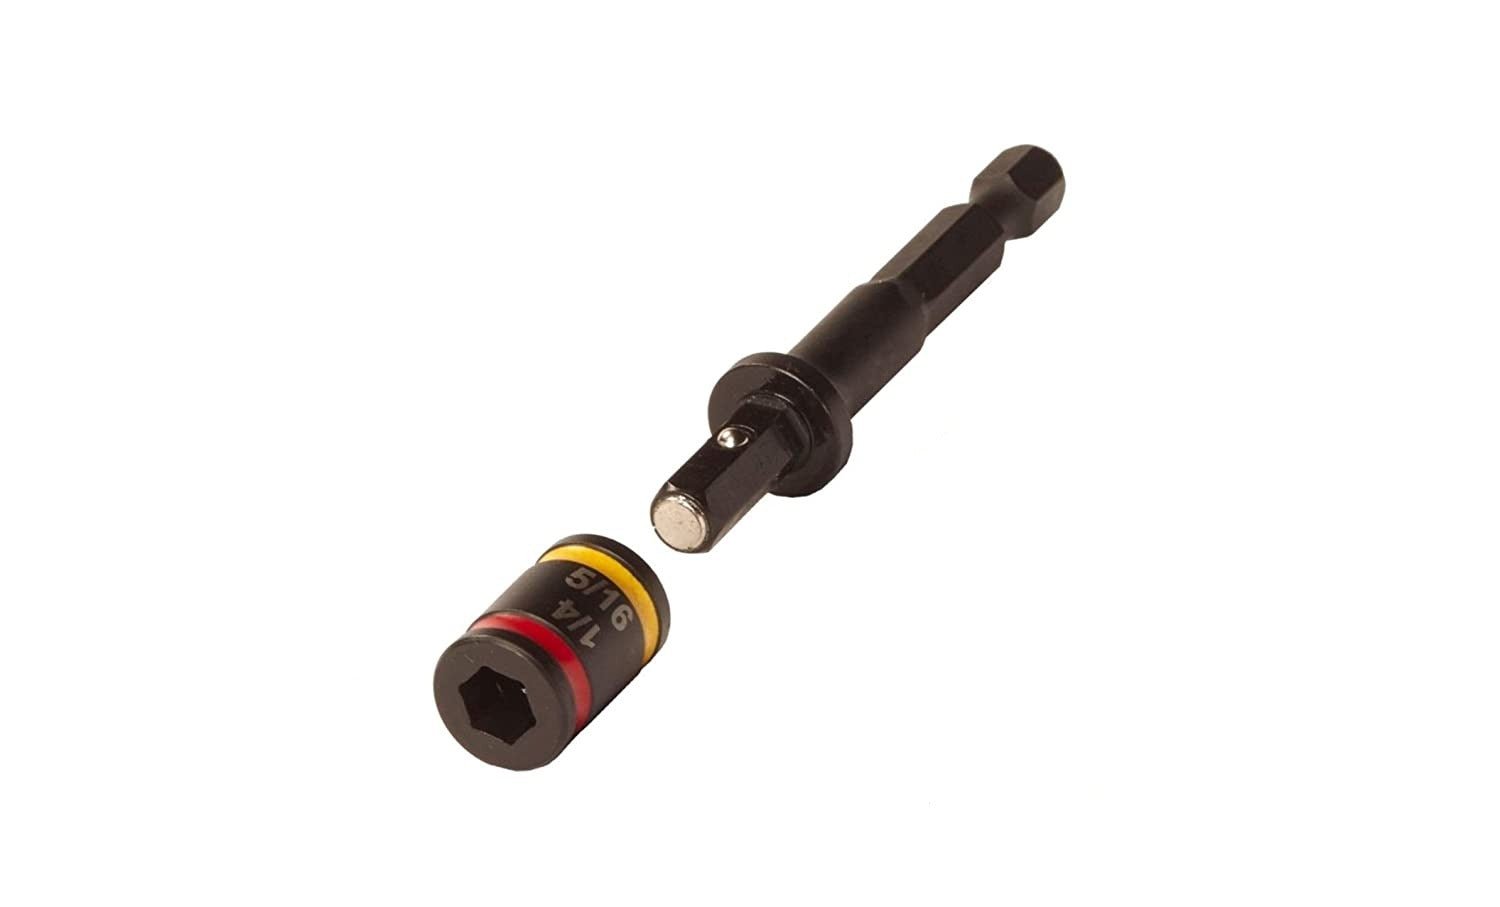 Malco MSHLC Hex Driver, 1/4" and 5/16", Cleanable, 2-5/8"